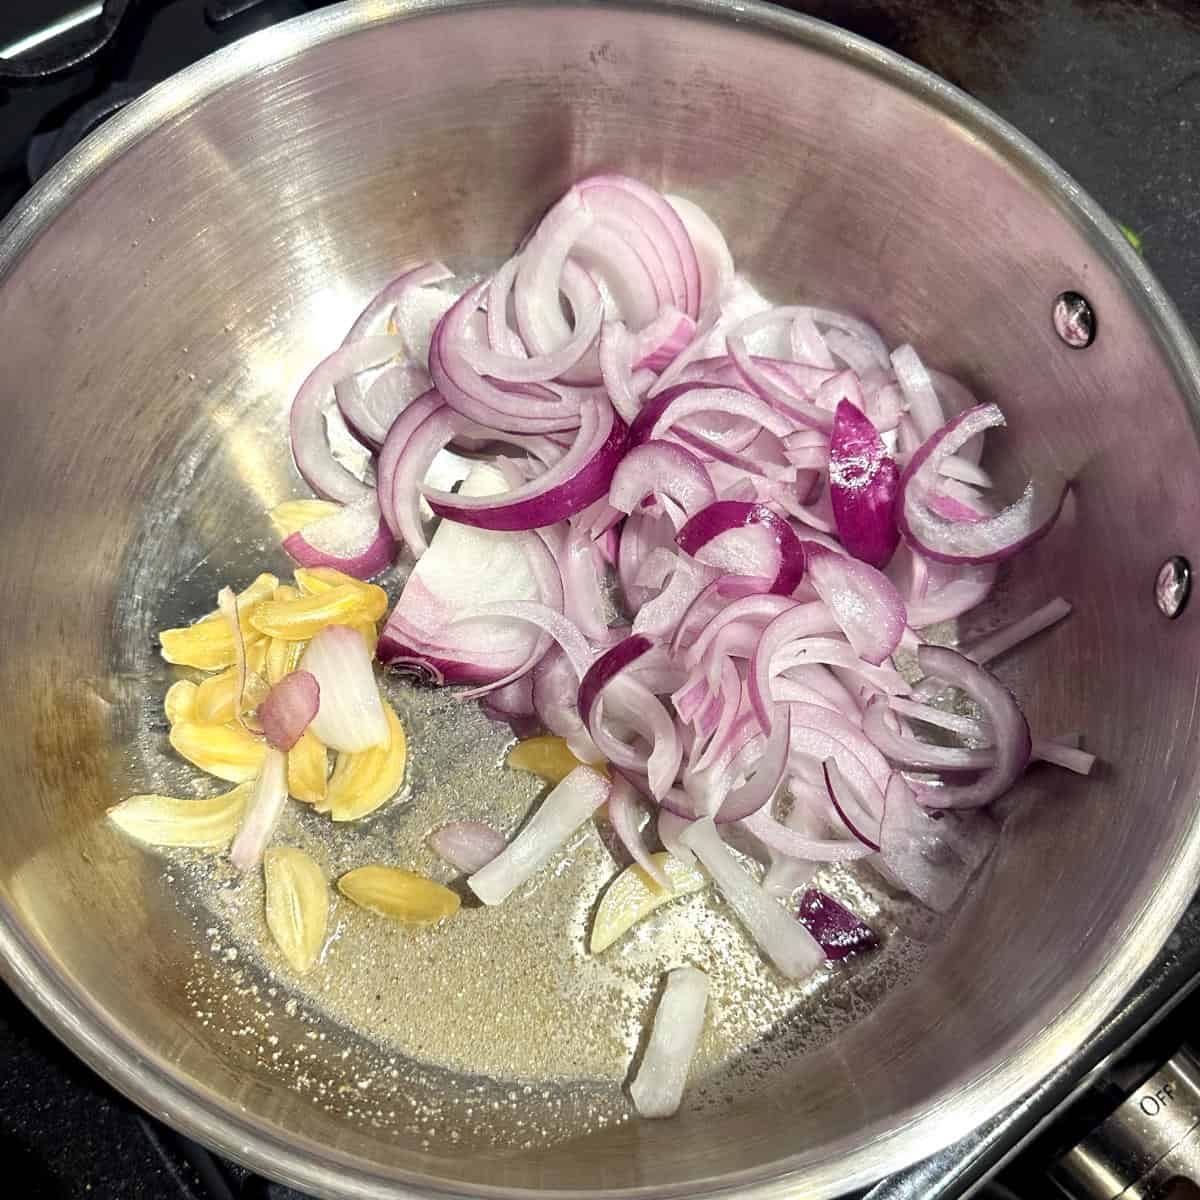 Onions and garlic added to asafetida in pan.